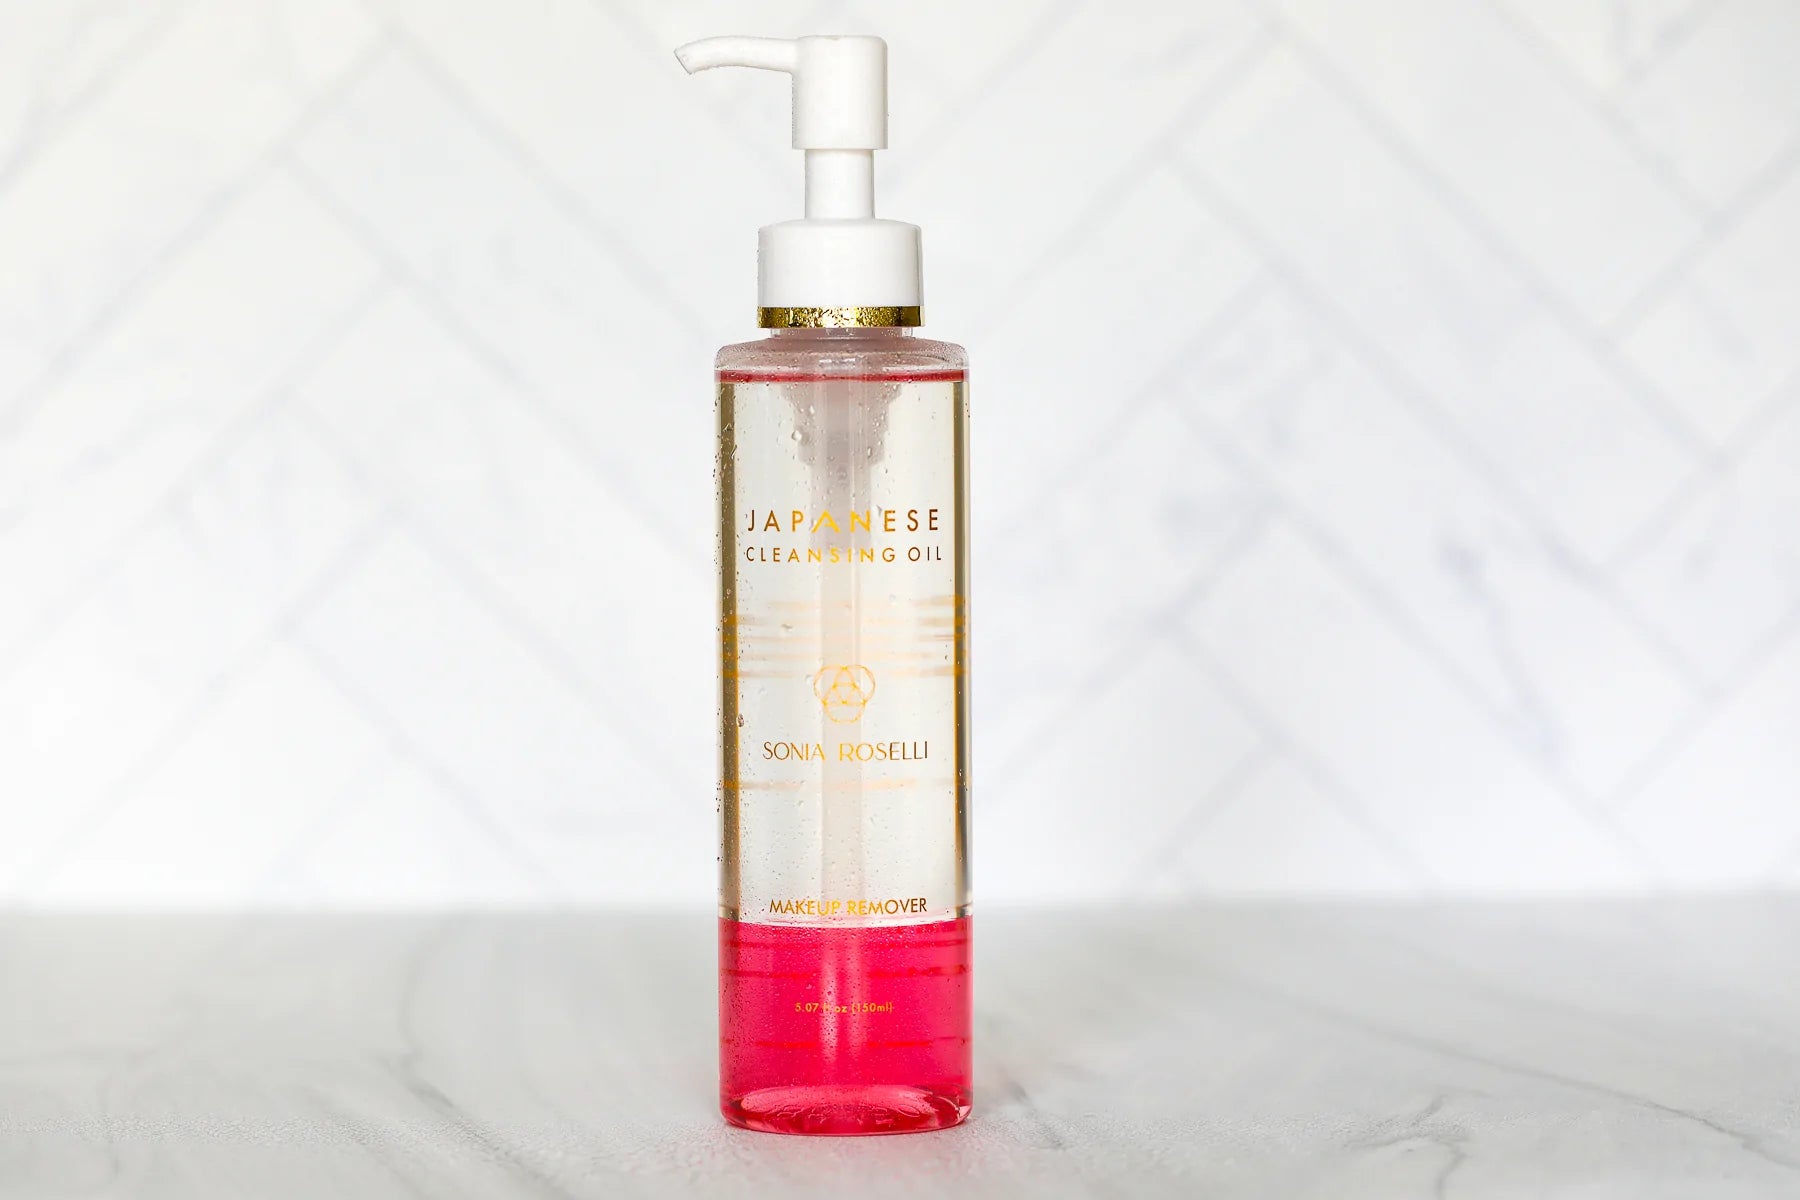 In a captivating product image, Sonia Roselli Beauty's Japanese Cleansing Oil, a versatile cleanser adept at removing SPF, makeup, and impurities, stands out with its elegant design. The product embodies the promise of gentle yet effective skincare, leaving your skin refreshed and radiant.